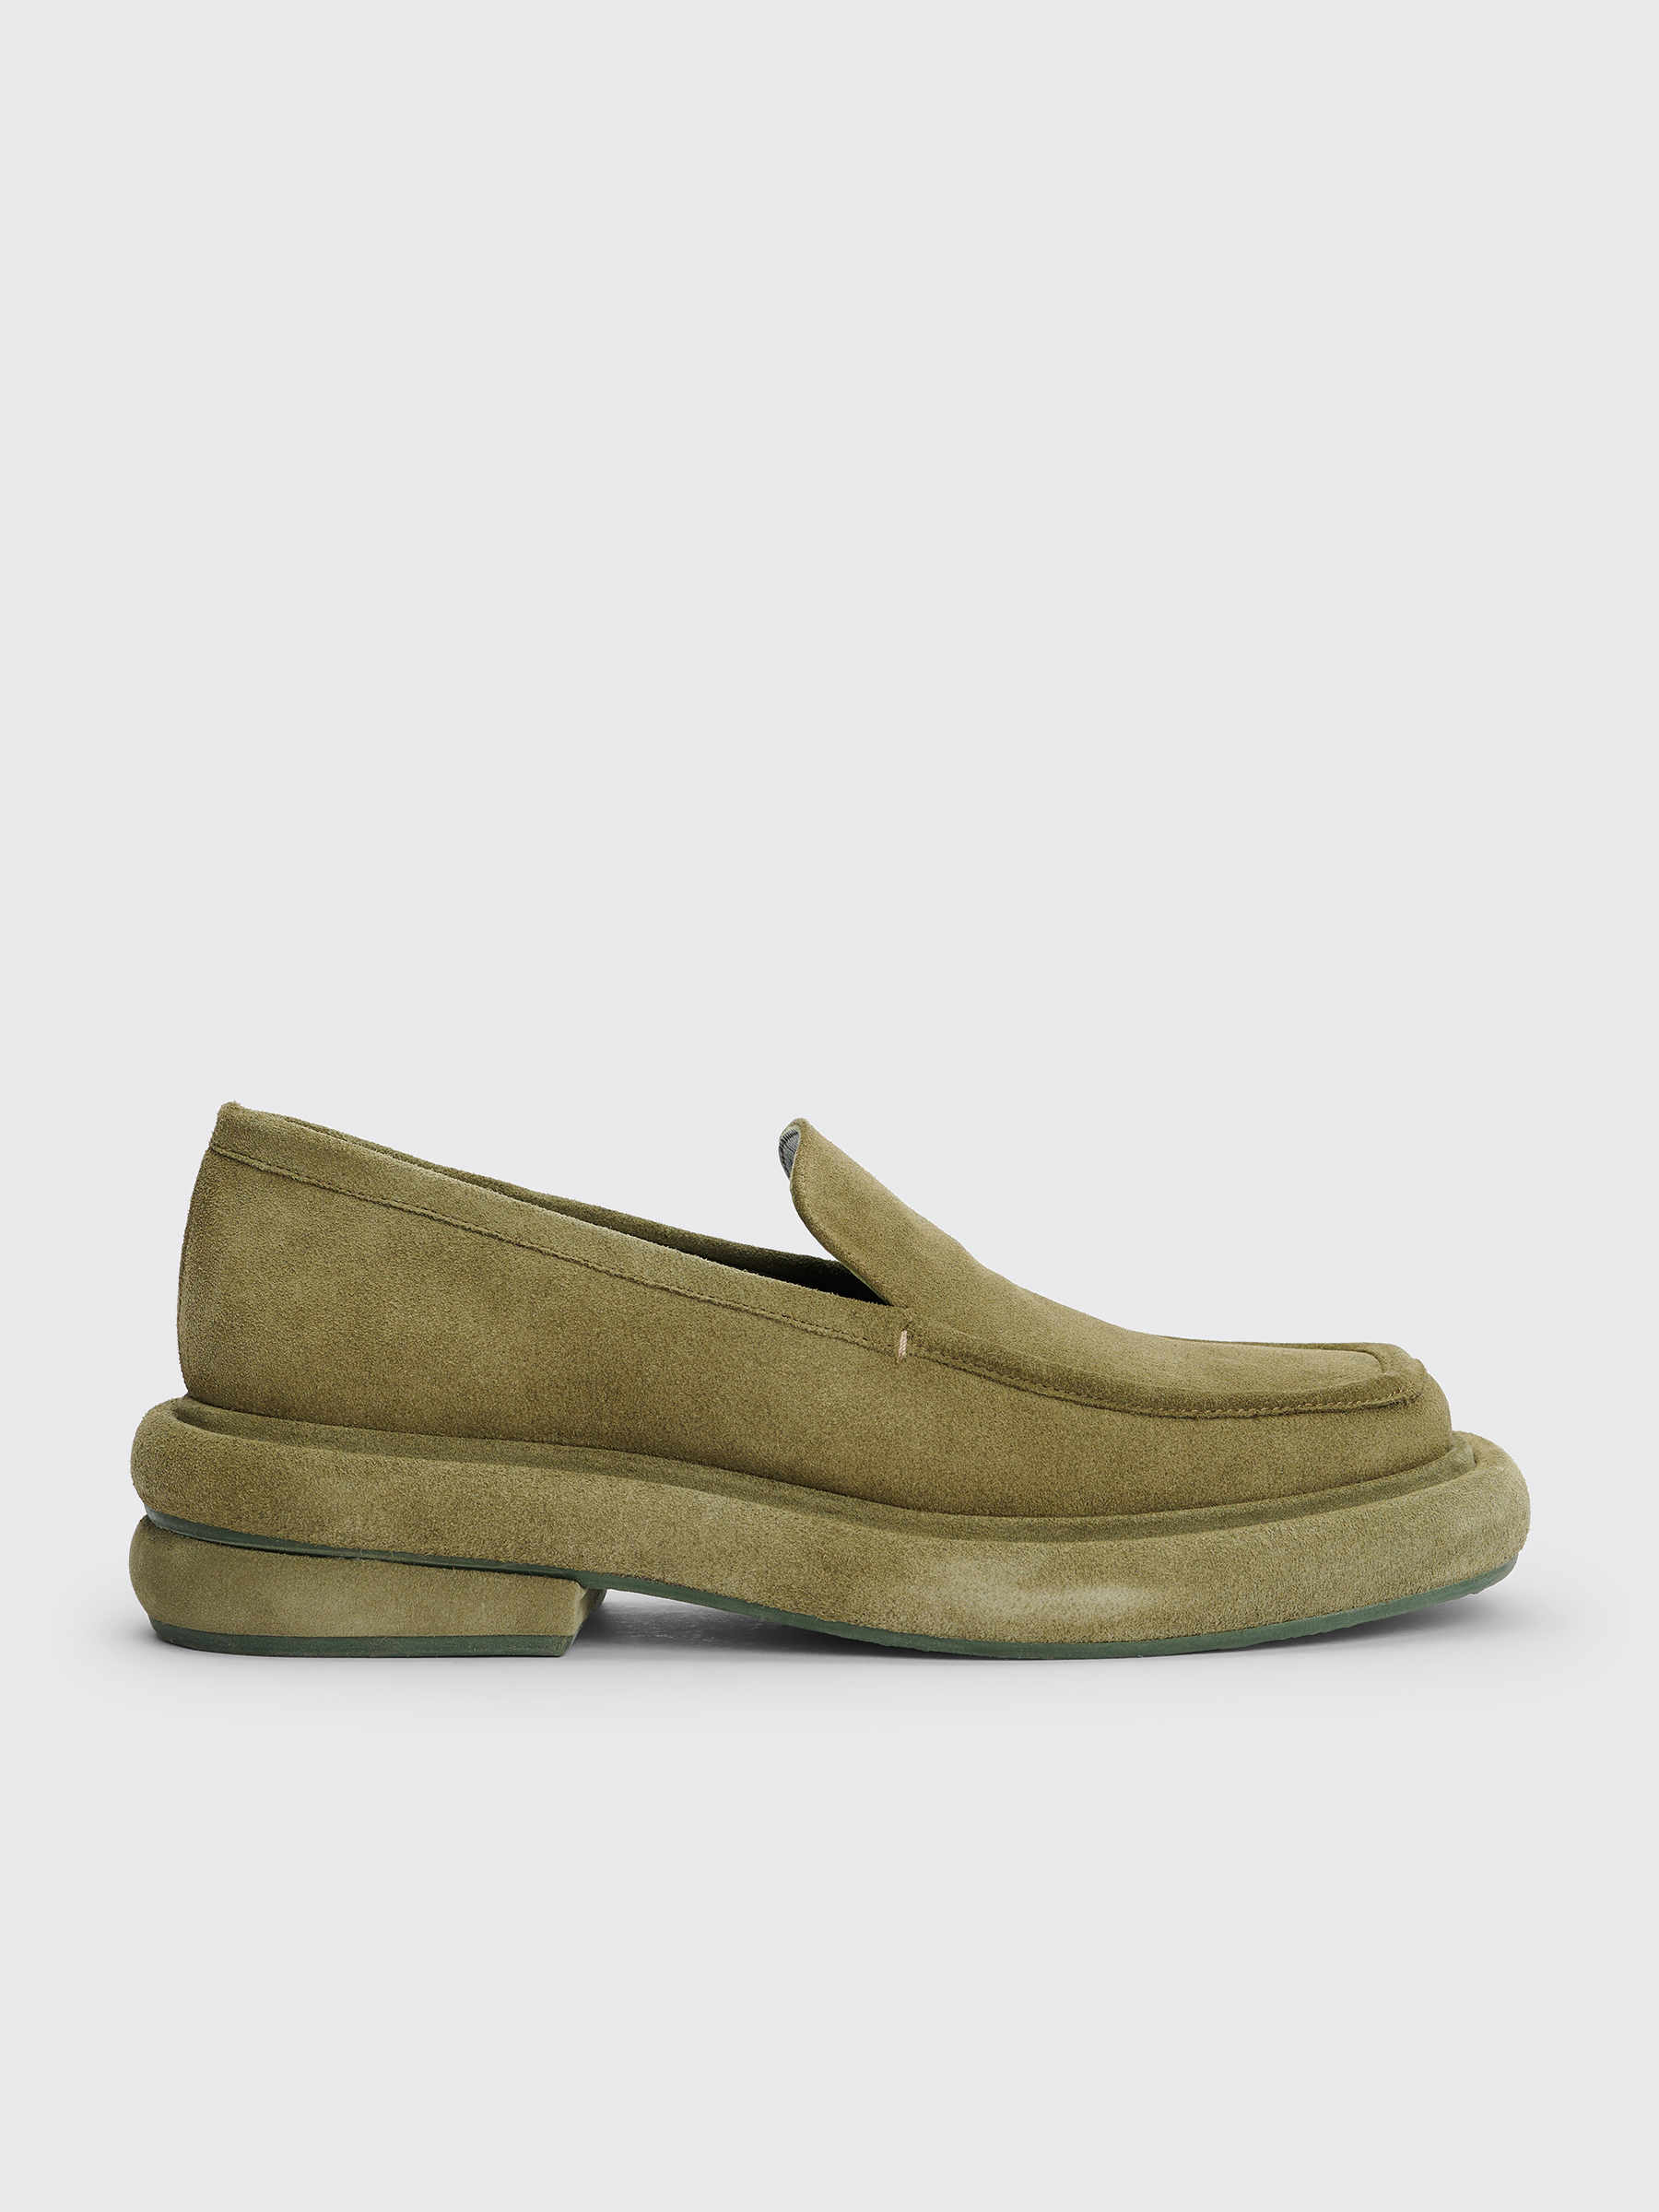 Très Bien - Eckhaus Latta Stacked Loafers Suede Olive